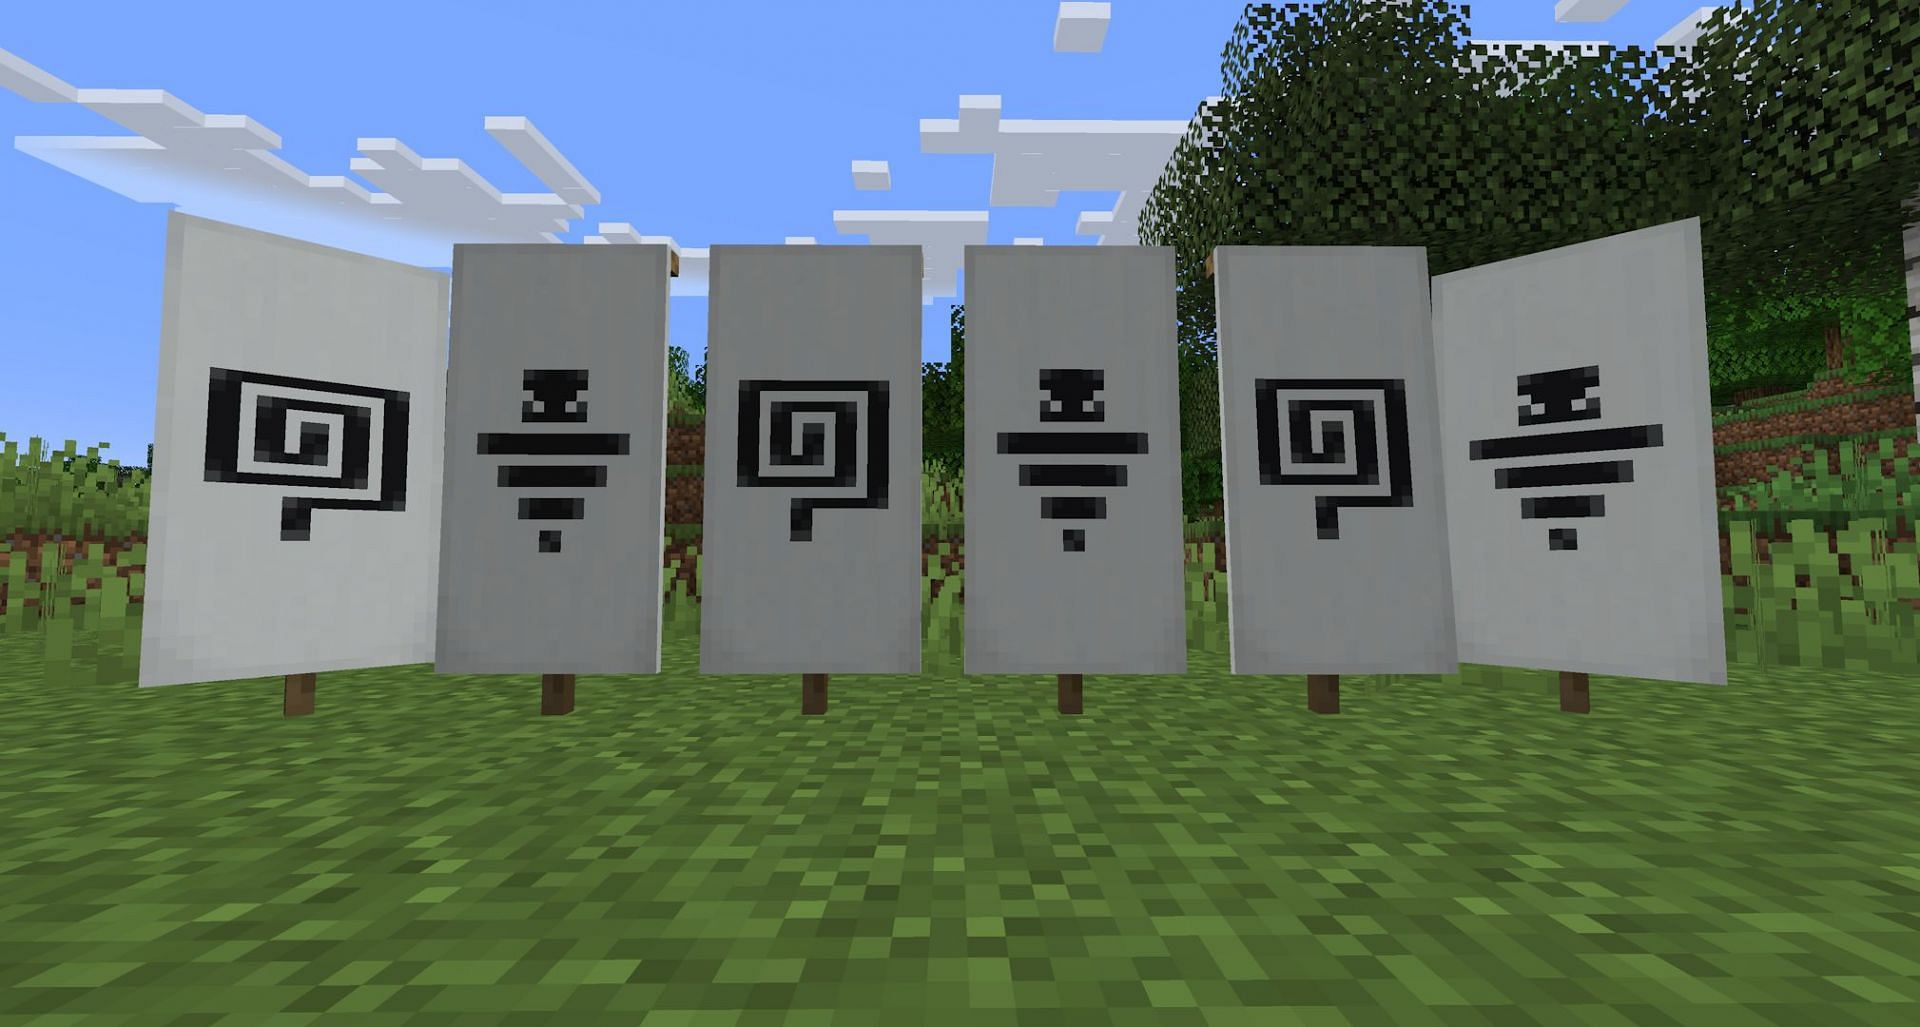 New banner patterns are always a delight to see. (Image via Mojang)